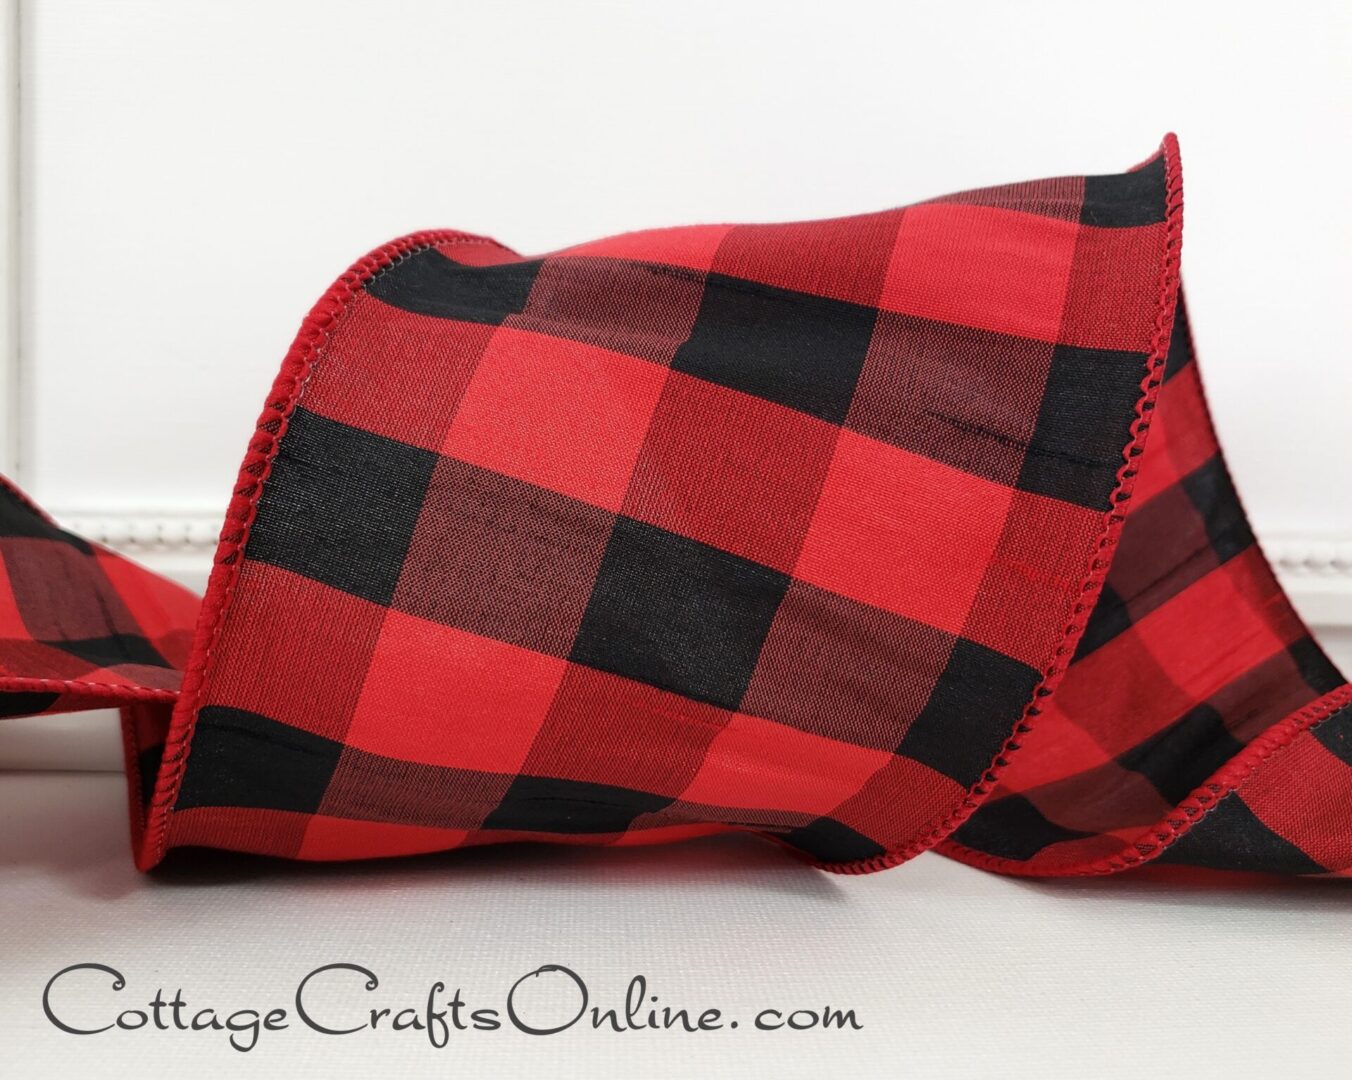 A red and black plaid scarf is folded up.